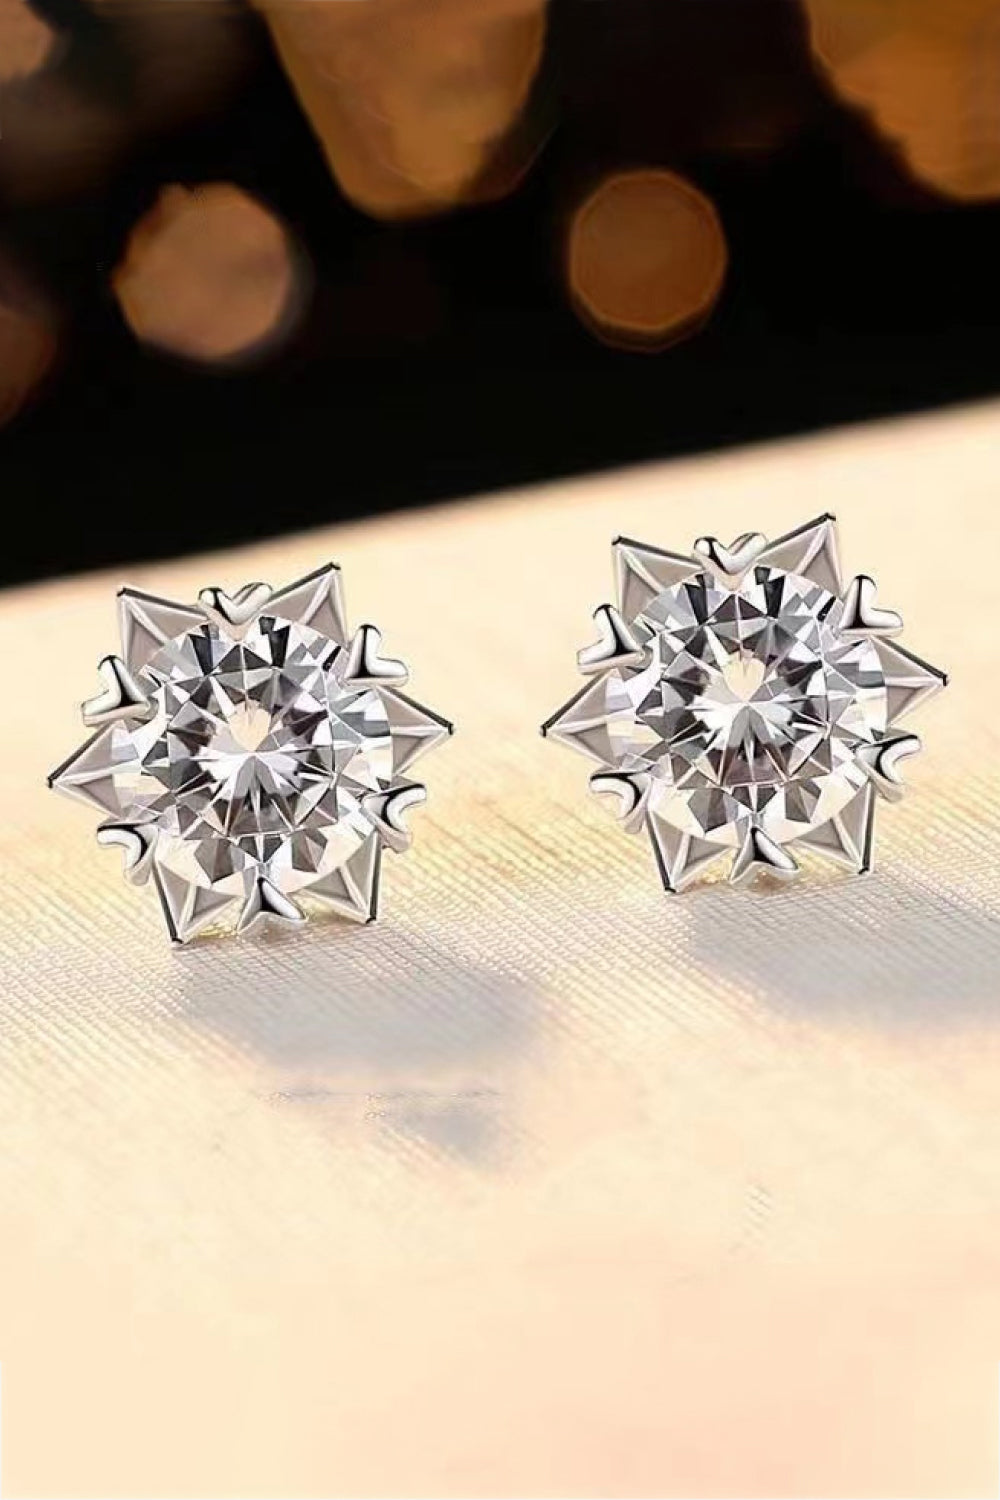 Stuck On You 4 Carat Moissanite Stud Earrings (Platinum-Plated Fine Silver)